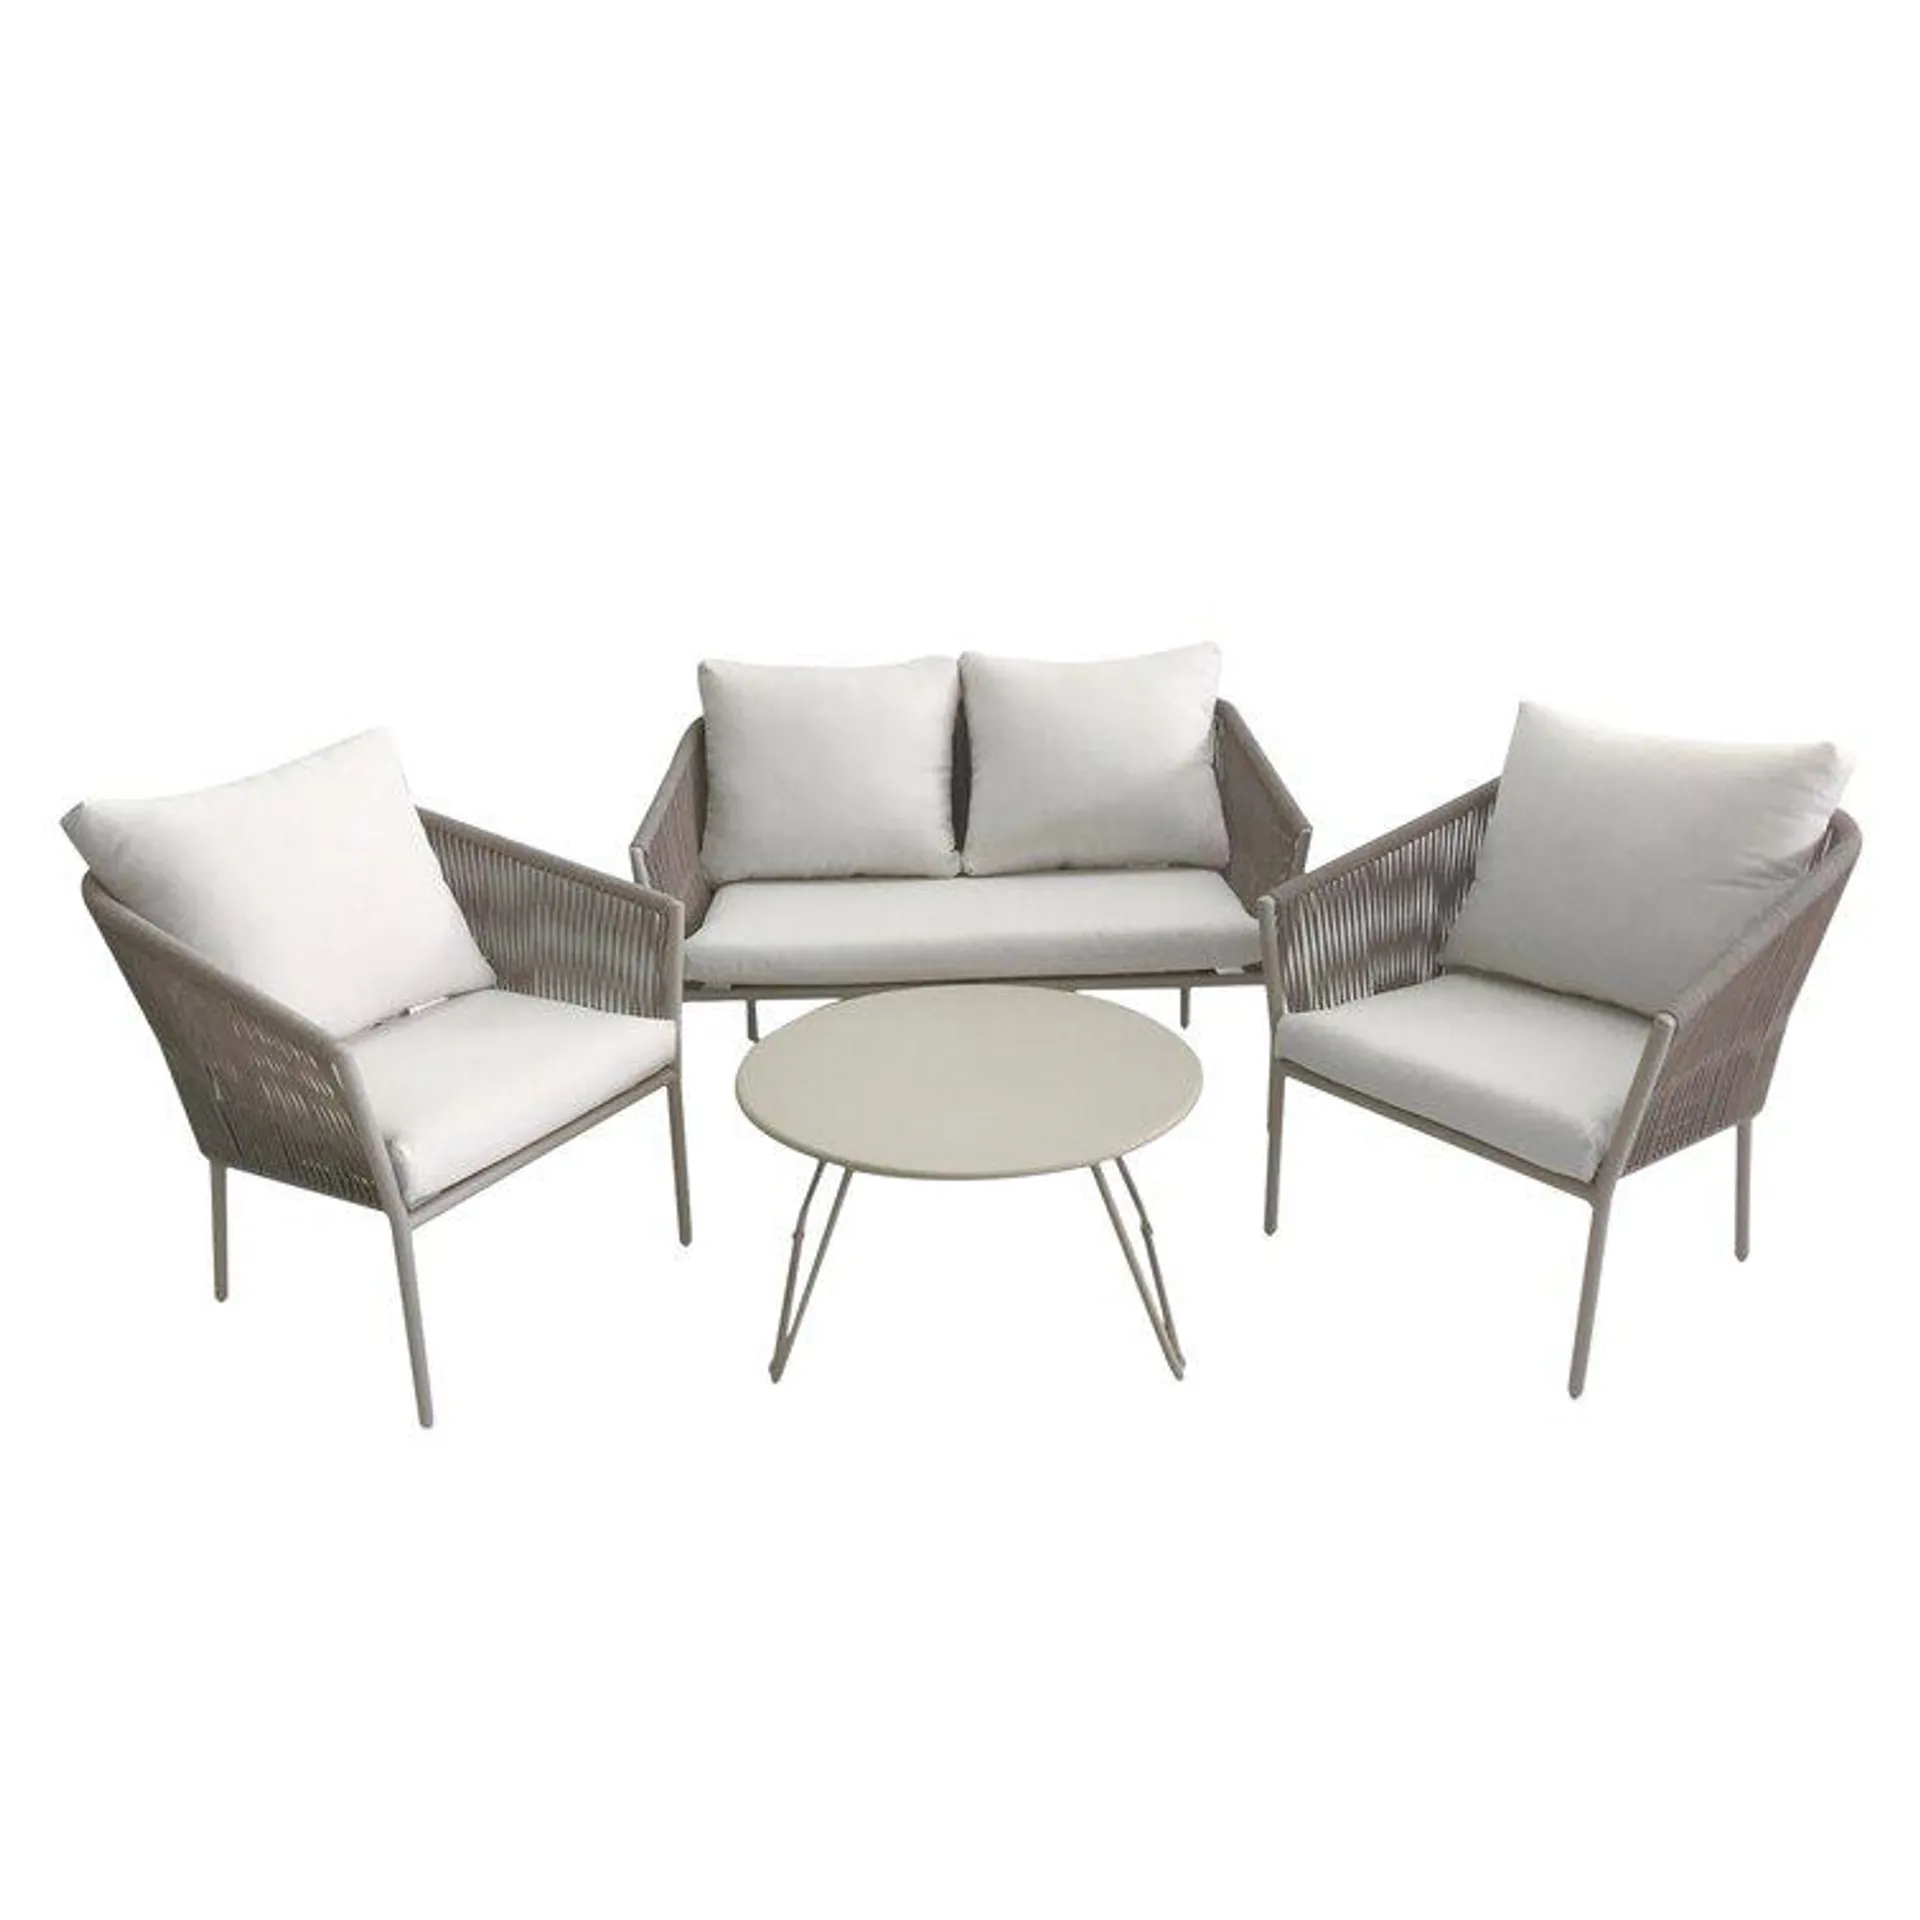 Desert Springs 4 Piece Sofa Seating Group with Cushions